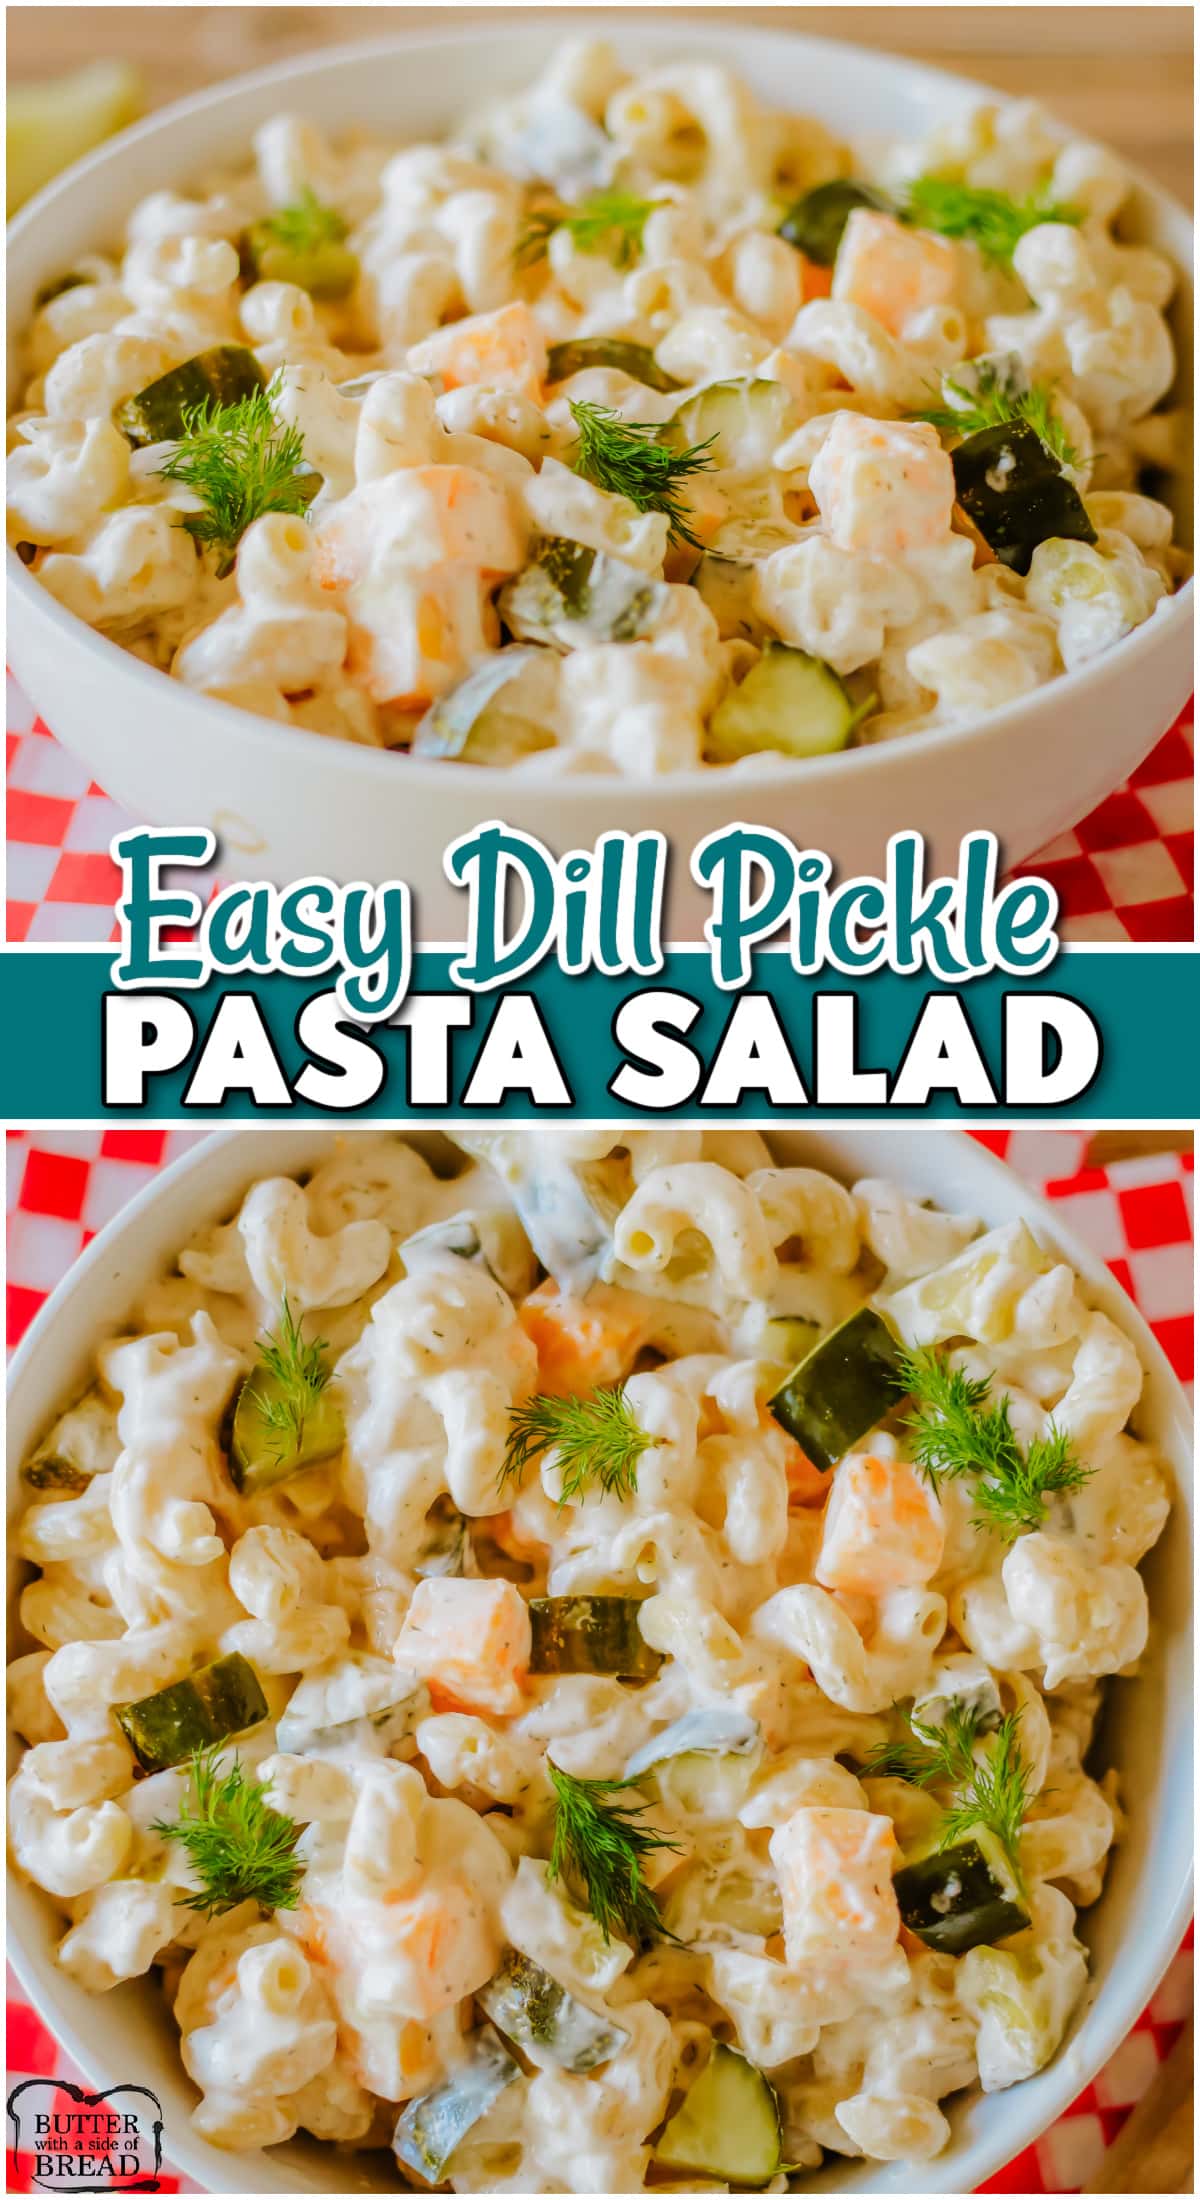 Creamy, tangy Dill Pickle Pasta Salad that's perfect for summer picnics or BBQ's! Pickle lovers are sure to enjoy this flavorful dill pasta salad!